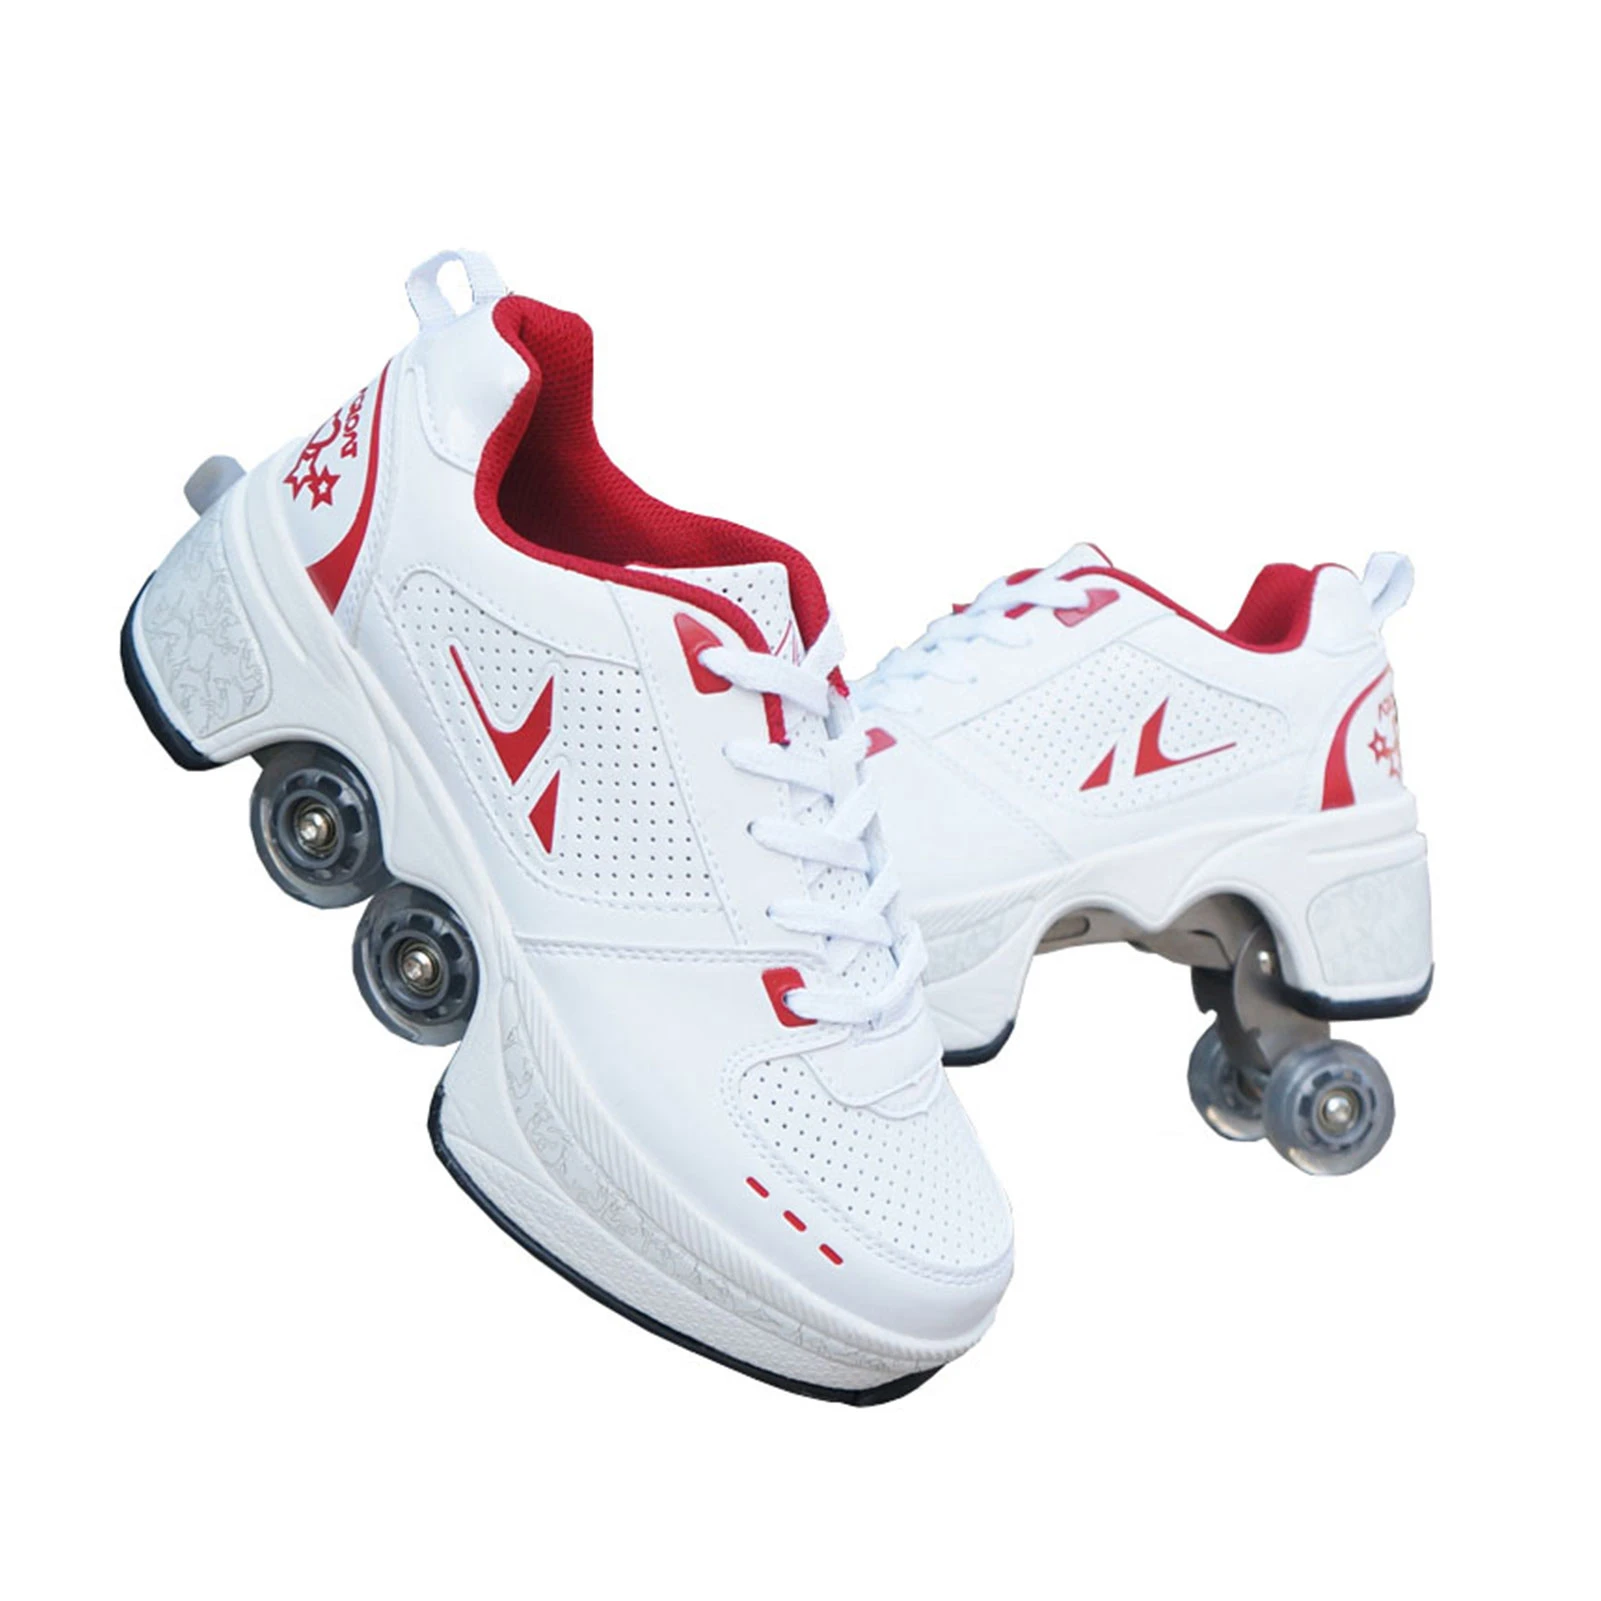 Deformation Parkour Shoes Four Wheels Rounds Of Running Shoes Roller Skates  Shoes Unisex Deformation Roller Shoes Skating Shoes - Kids' Sneakers -  AliExpress